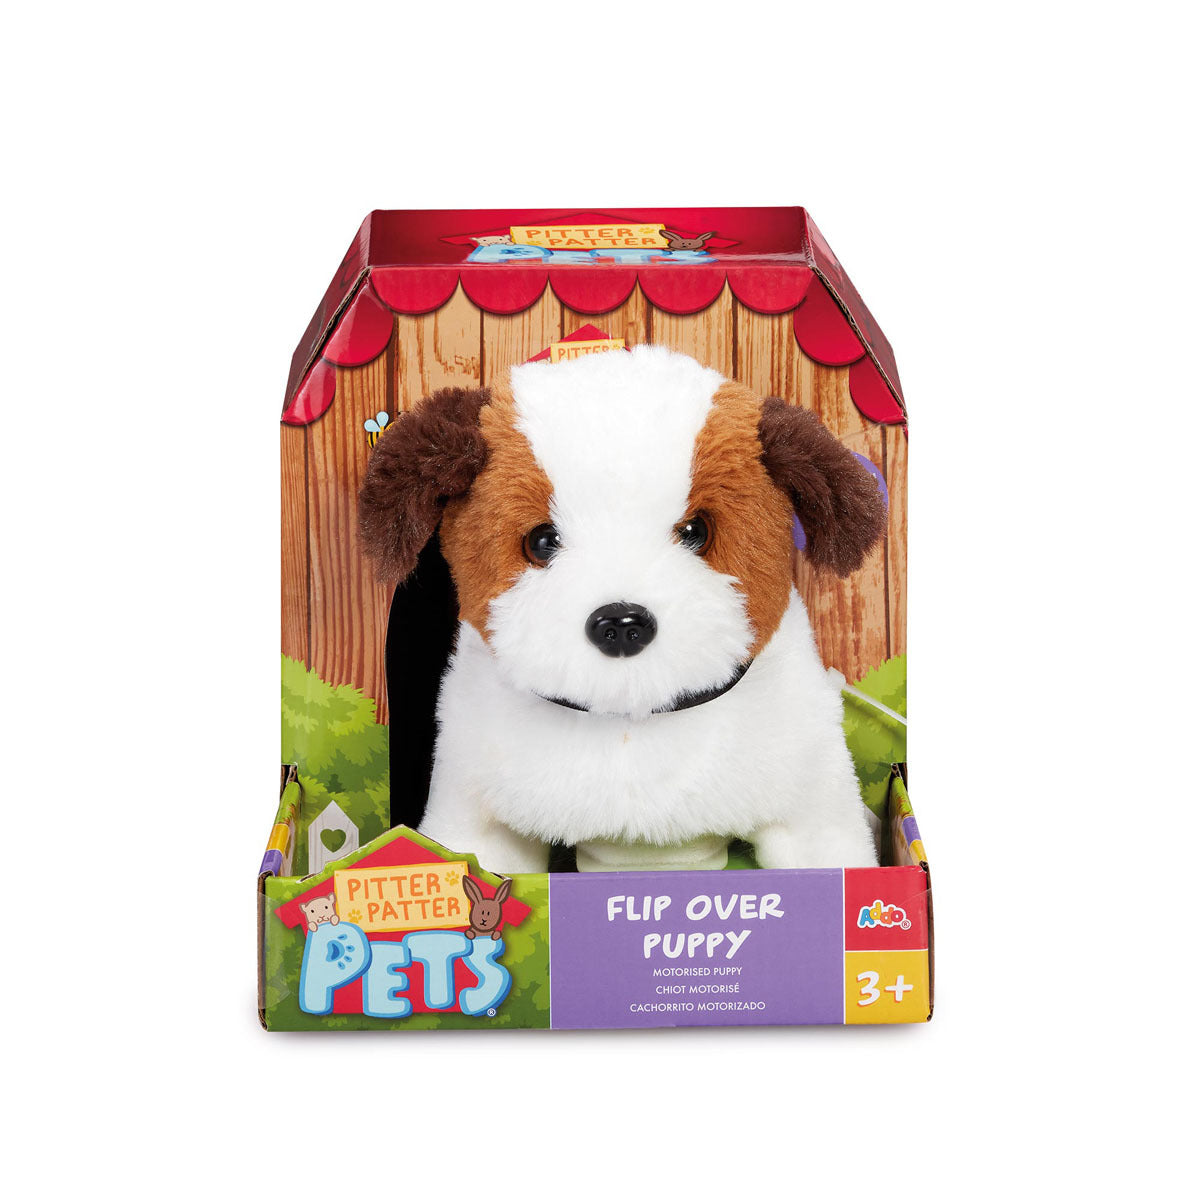 Pitter Patter Pets Flip Over Puppy Electronic Pet